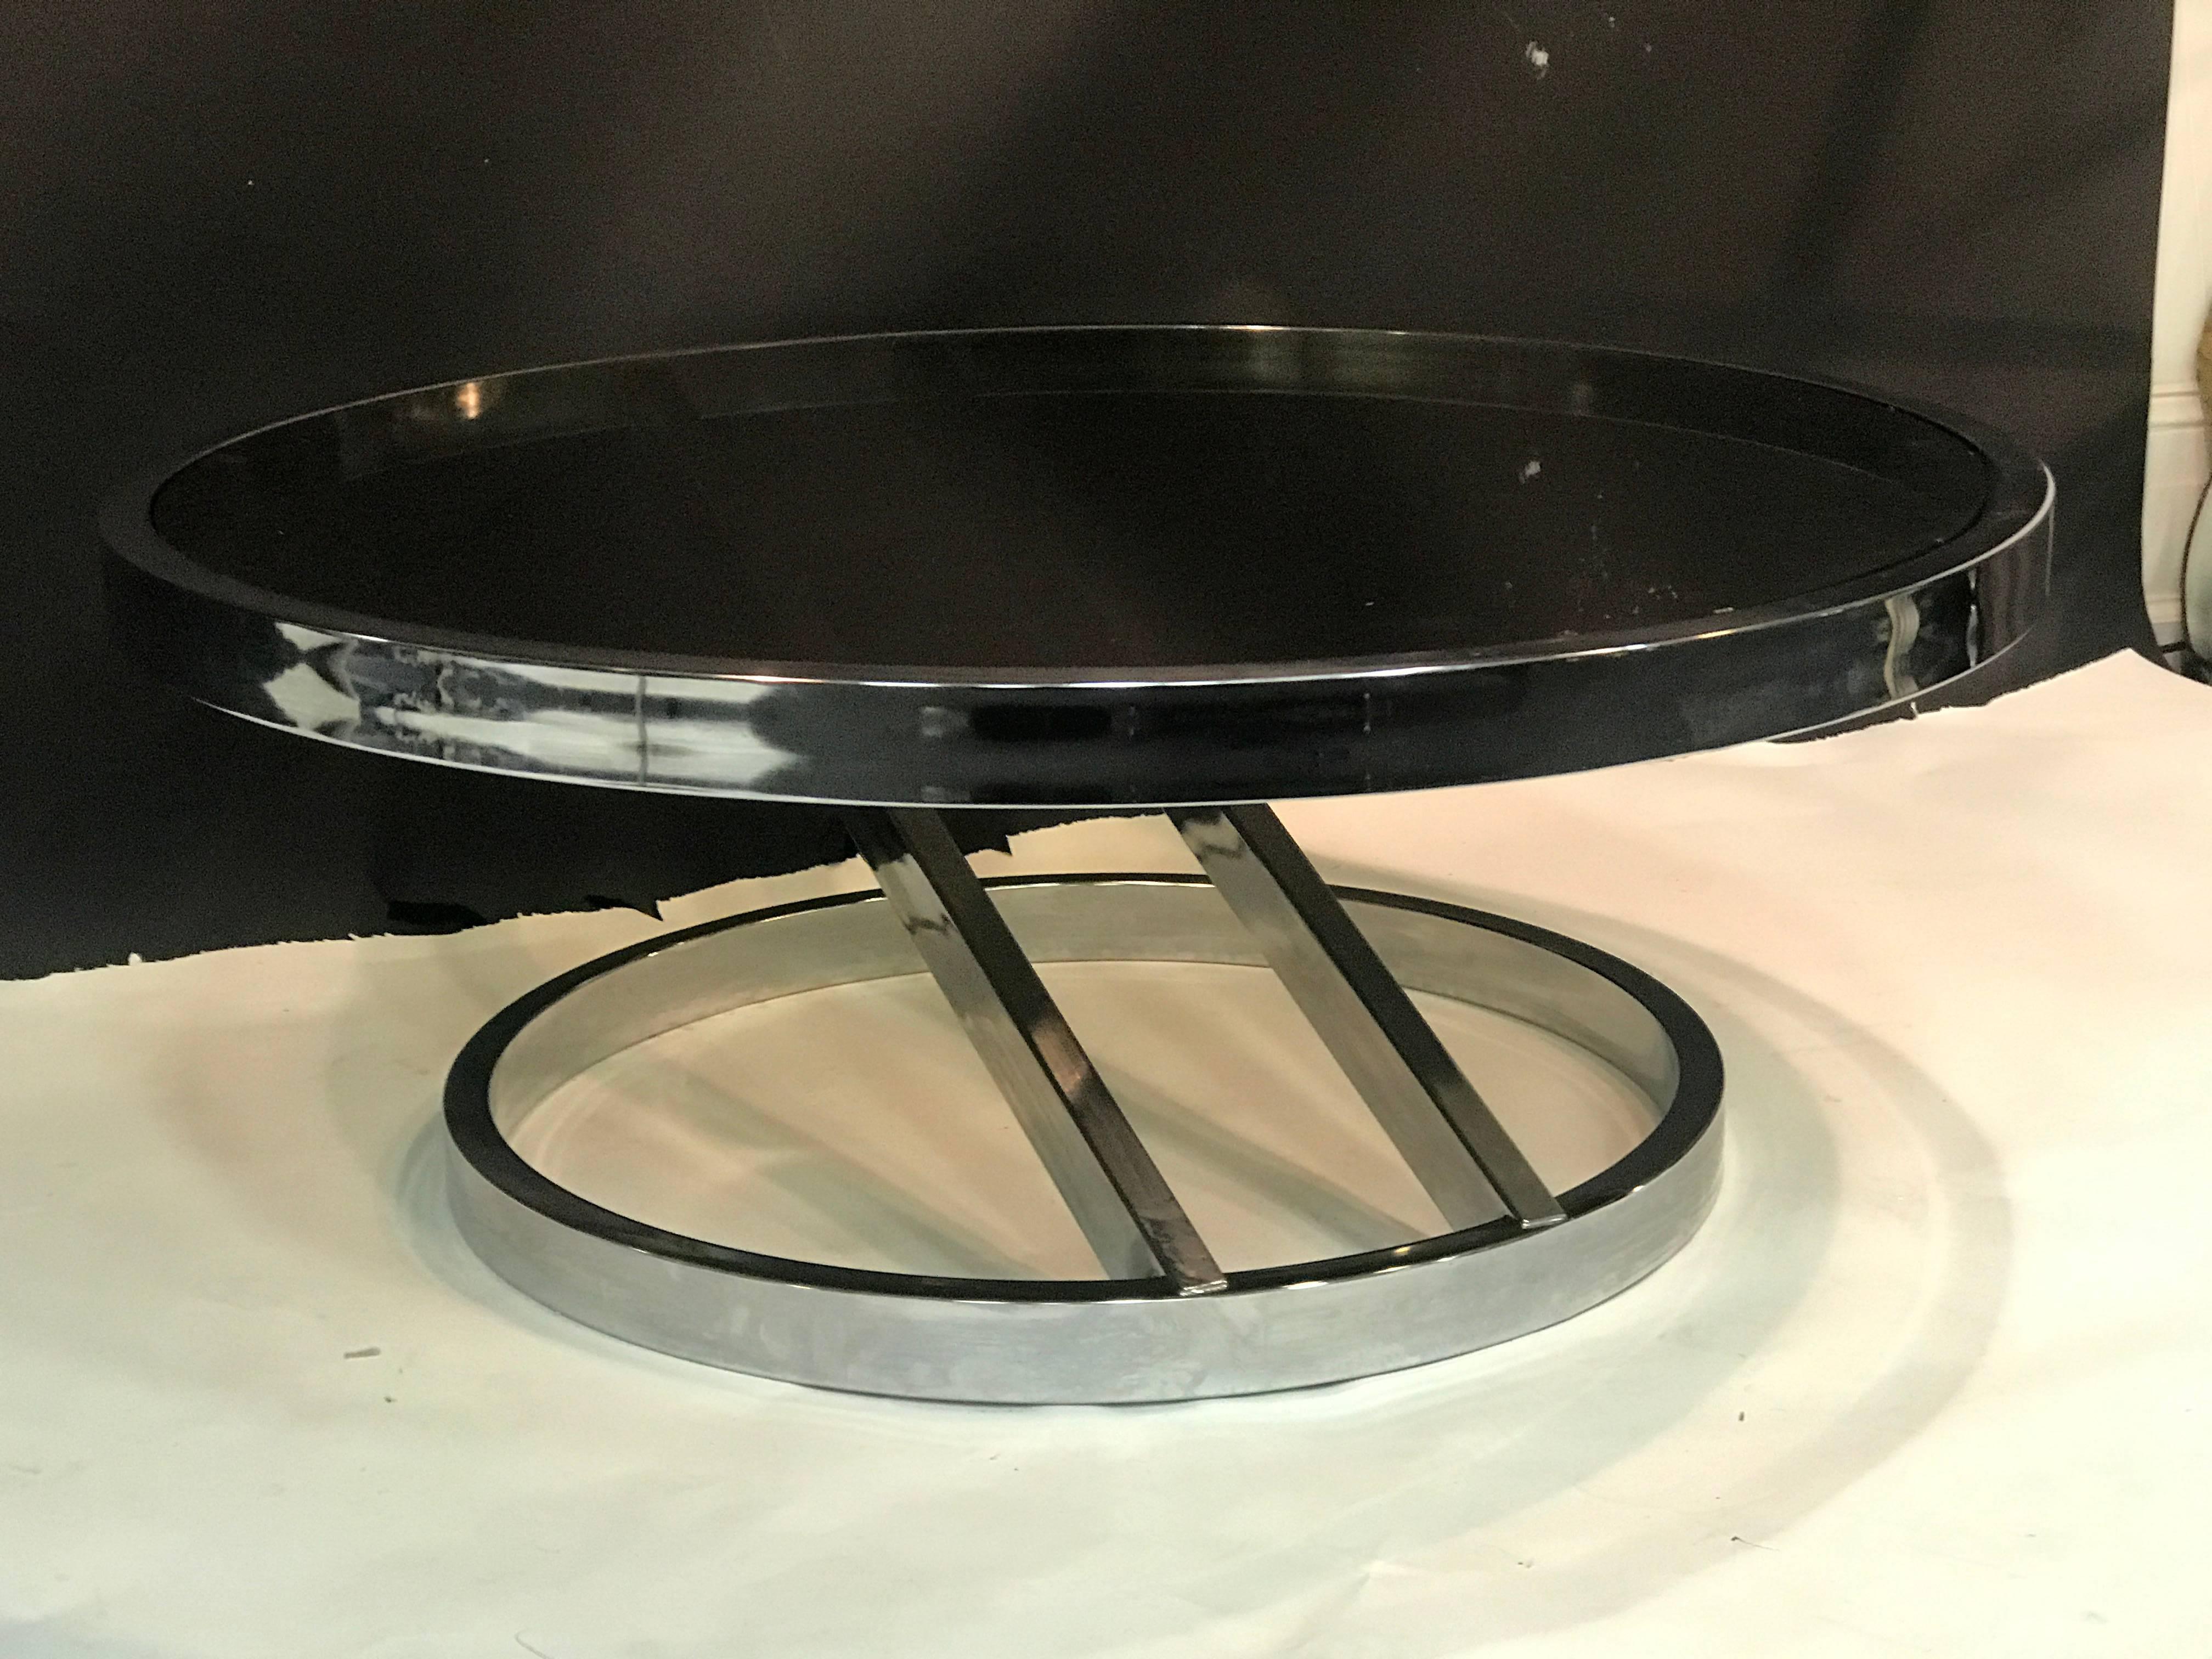 A striking chrome coffee or centre table with smoke glass top by Milo Baughman, circa 1970. Good vintage condition with age appropriate wear.